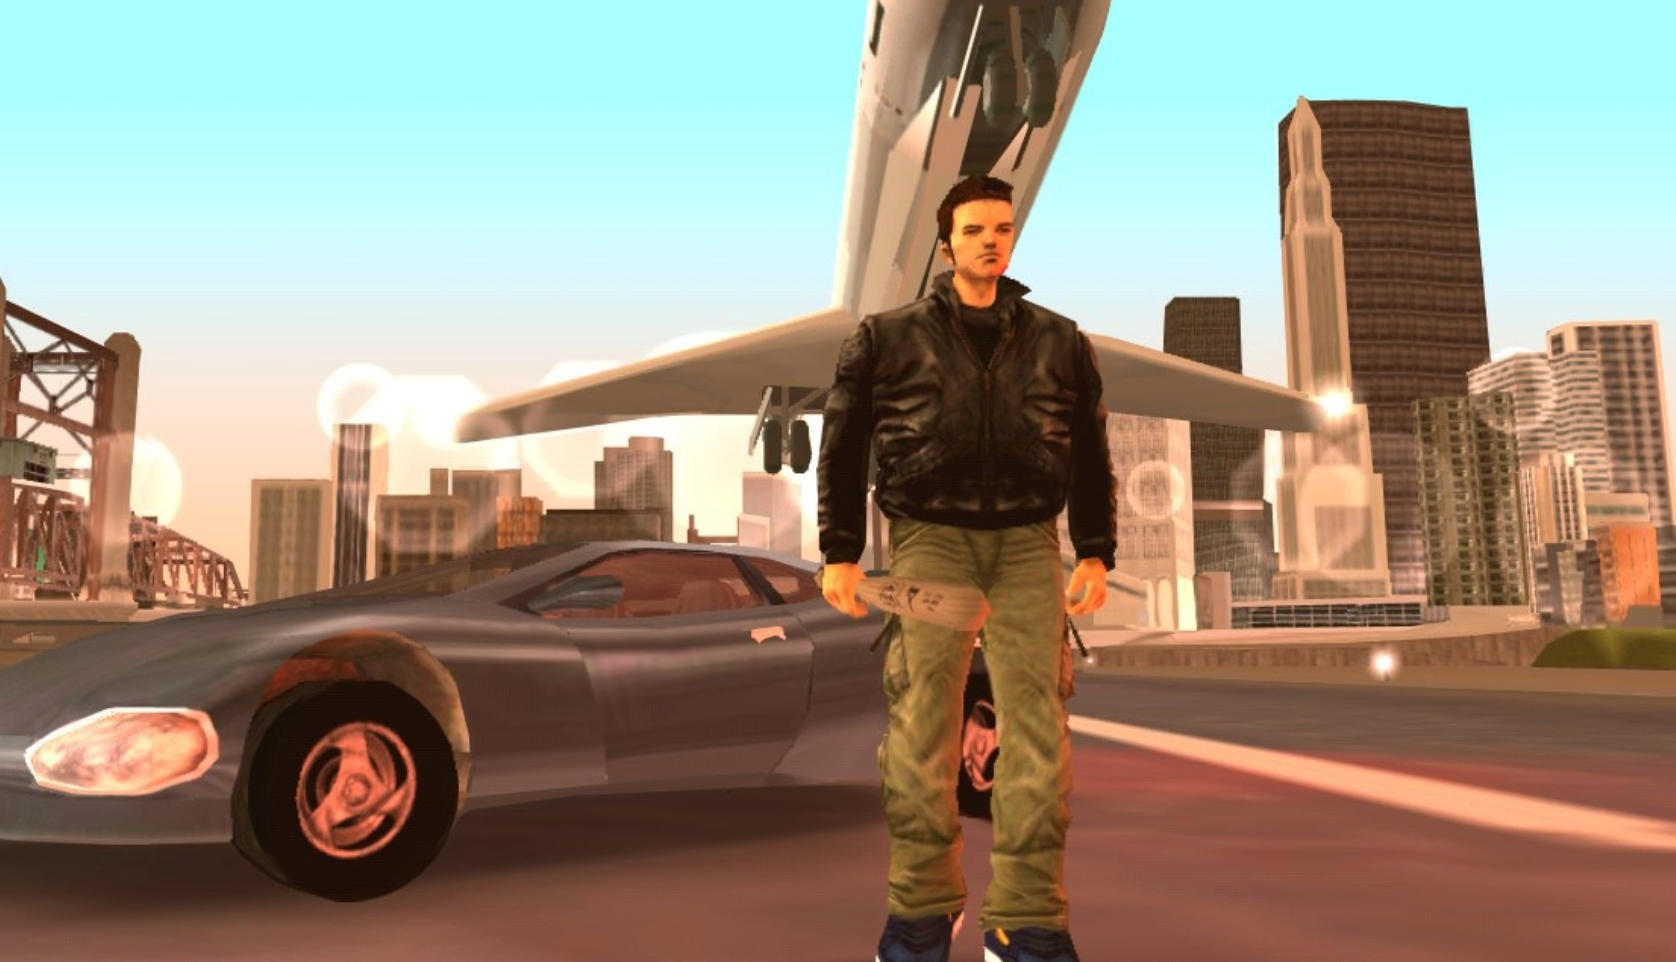 Image for The fastest cars in GTA 3 - Cheetah, Infernus, Mafia Sentinel, and more